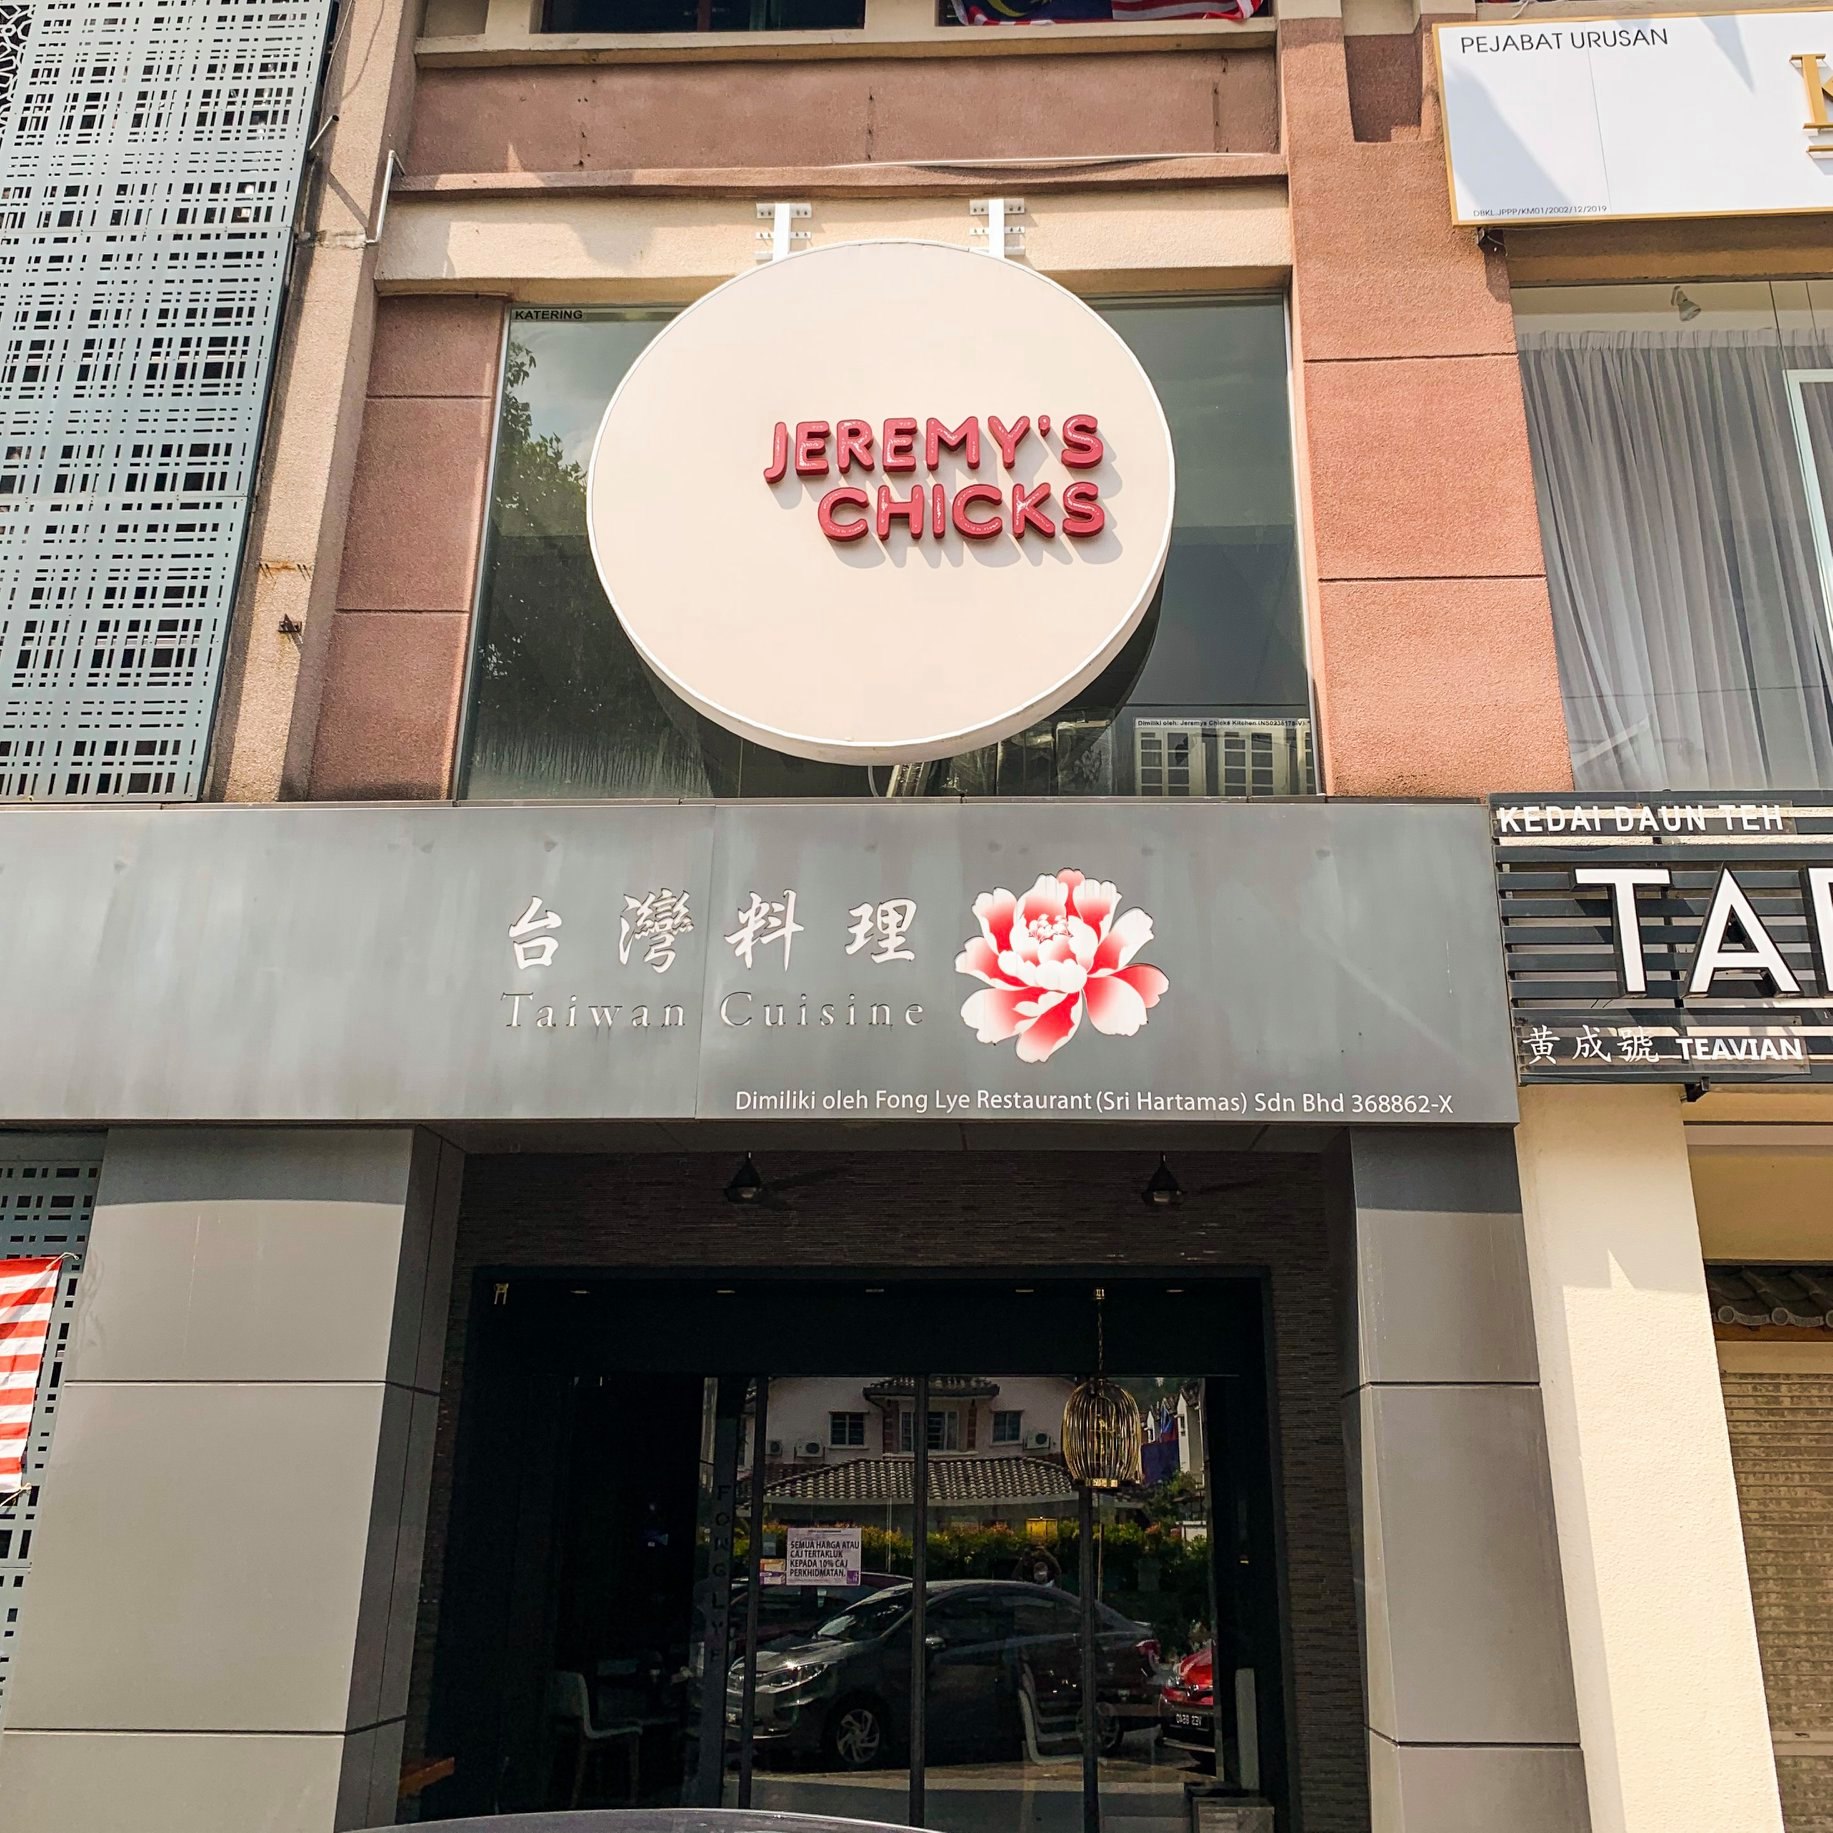 Jeremy's Chick: Delivery-Based Chicken Rice Joint Is Taking A Break